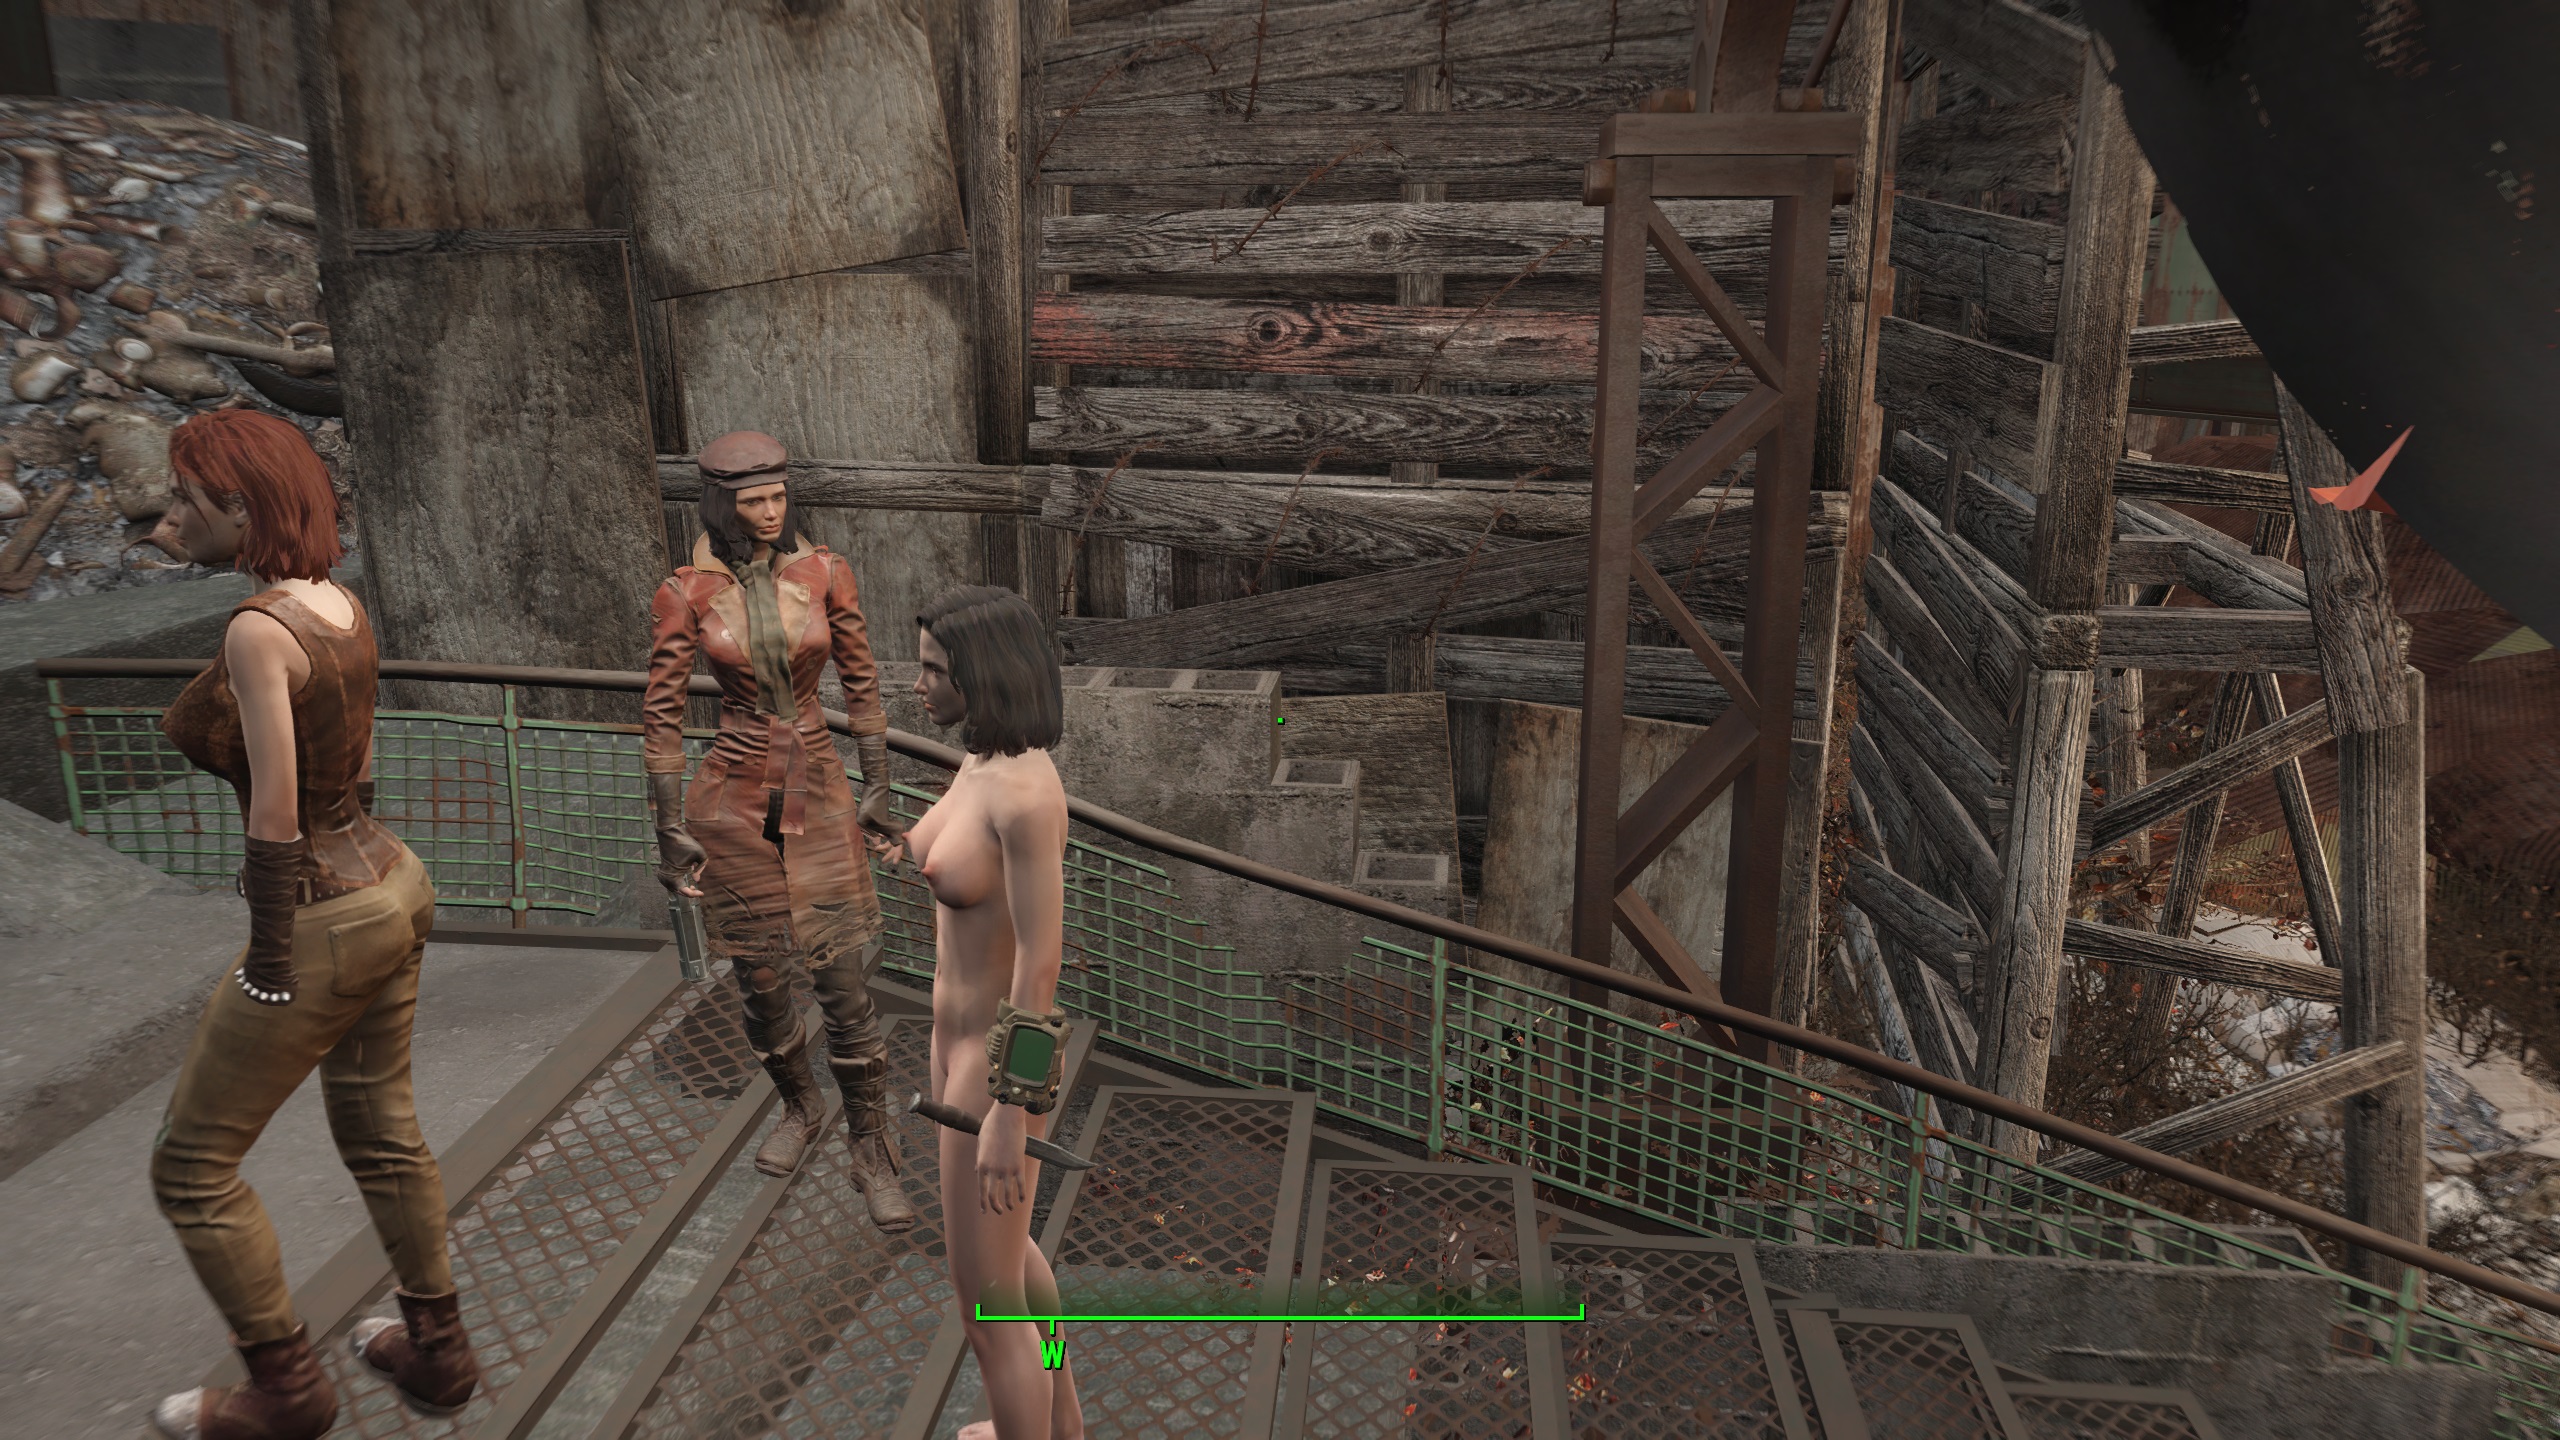 Fallout 4 fourplay not getting threesome